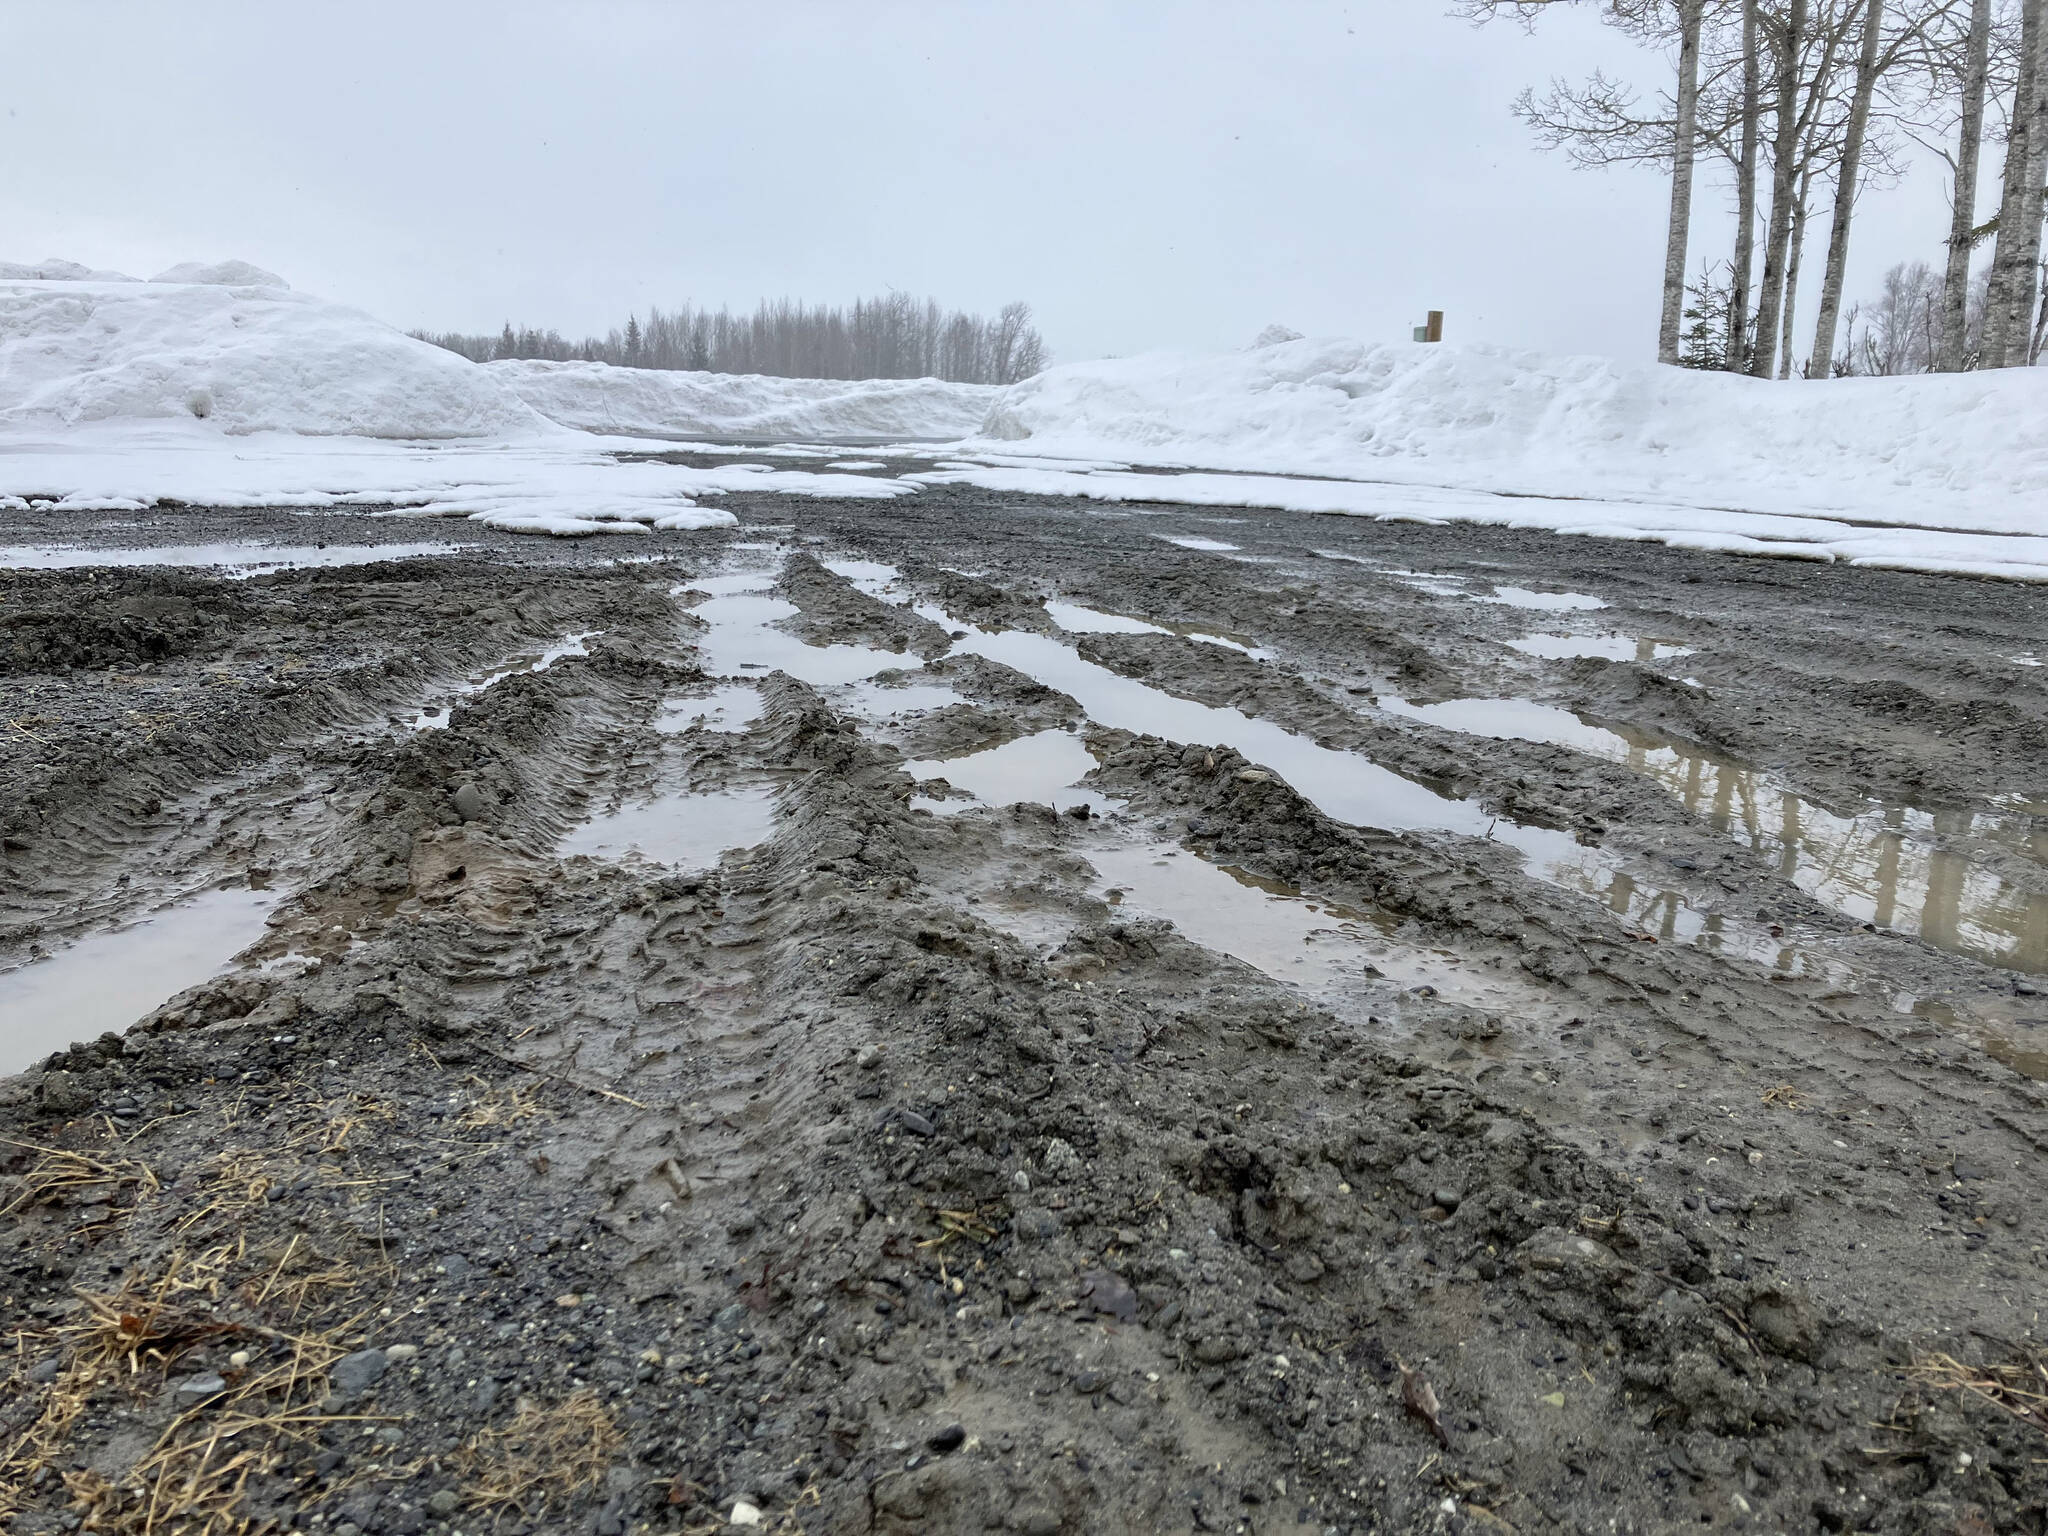 Snow falls on tire tracks and puddles of water in the mud outside the home of Jake Dye in Soldotna, Alaska, on Thursday, April 13, 2023. (Photo courtesy Sarah McMinn)